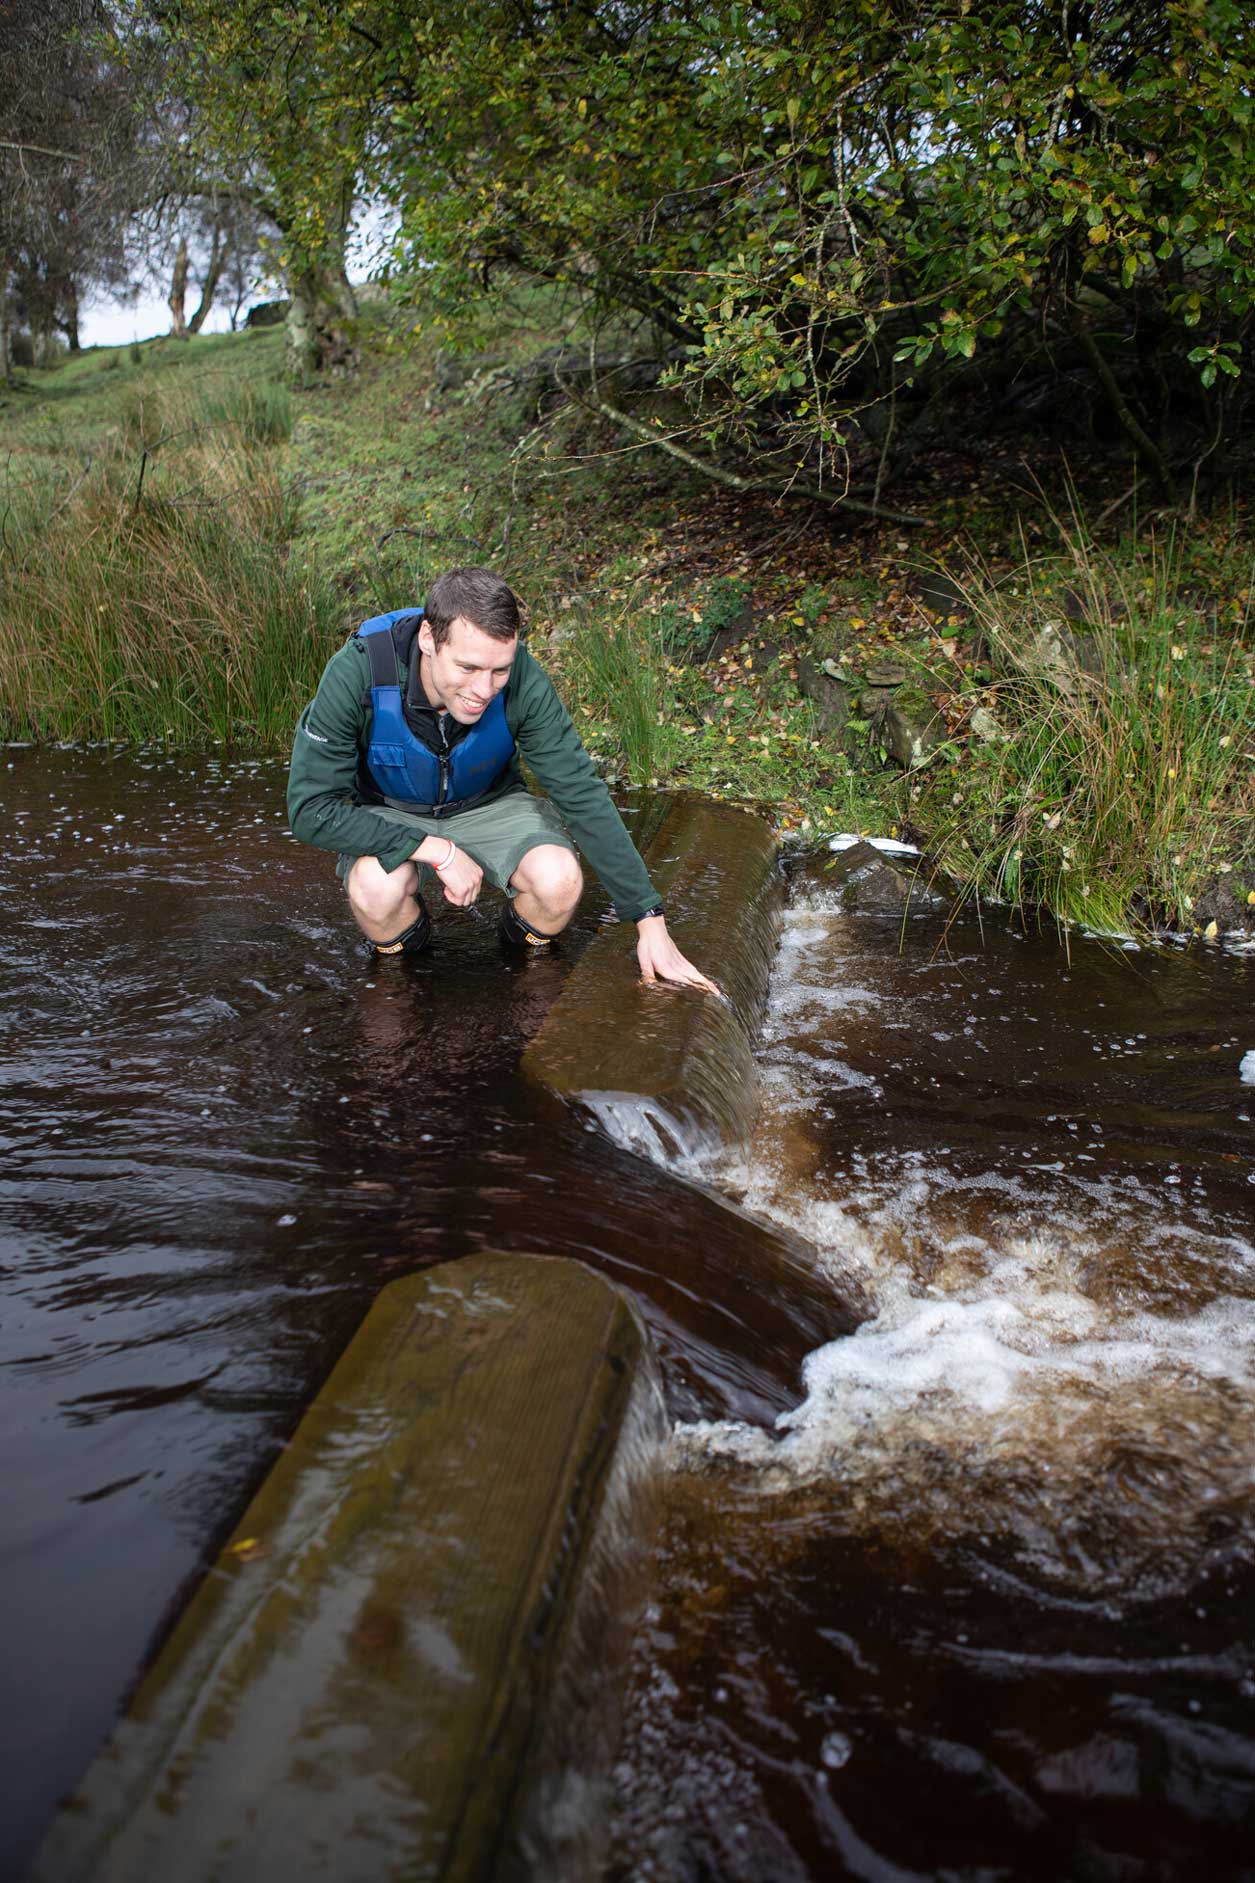 Male next to a wooden pre-weir in a river. The pre-weir has been installed as part of efforts to improve fish passage through the water. Credit Charlie Fox.